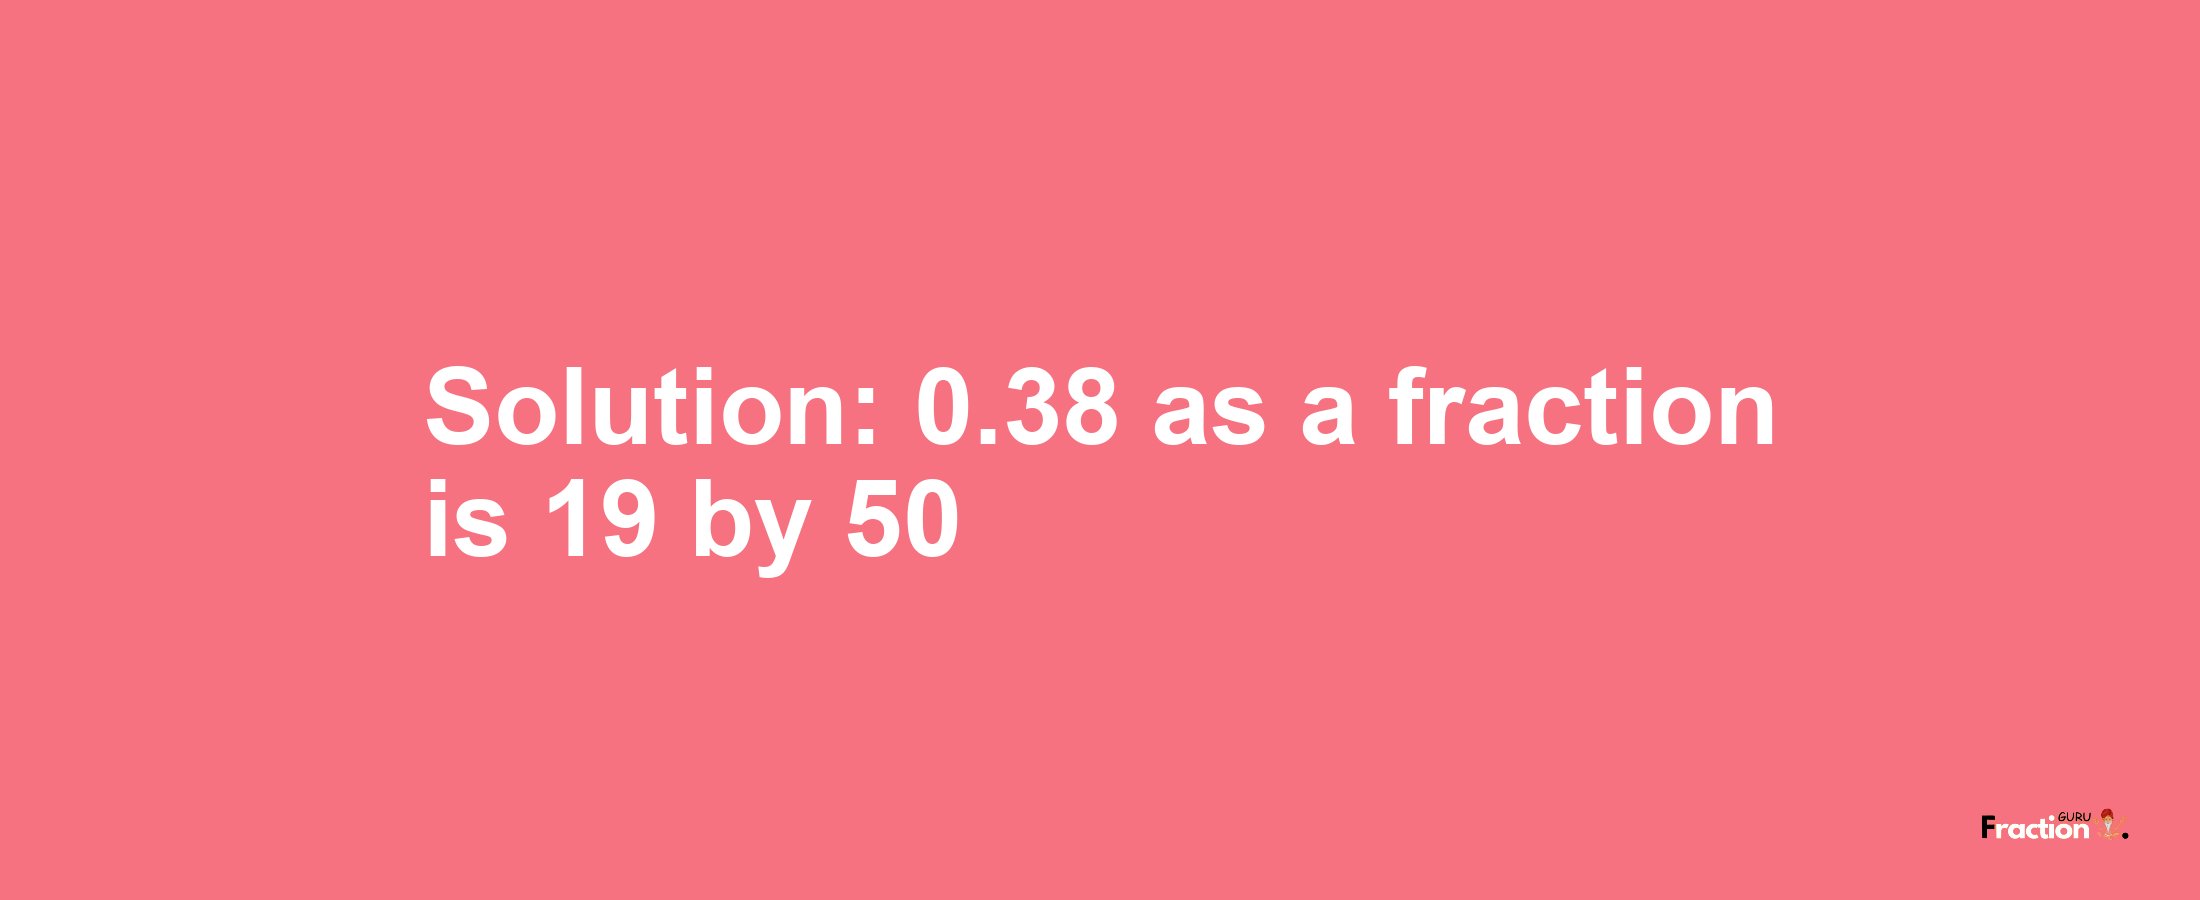 Solution:0.38 as a fraction is 19/50